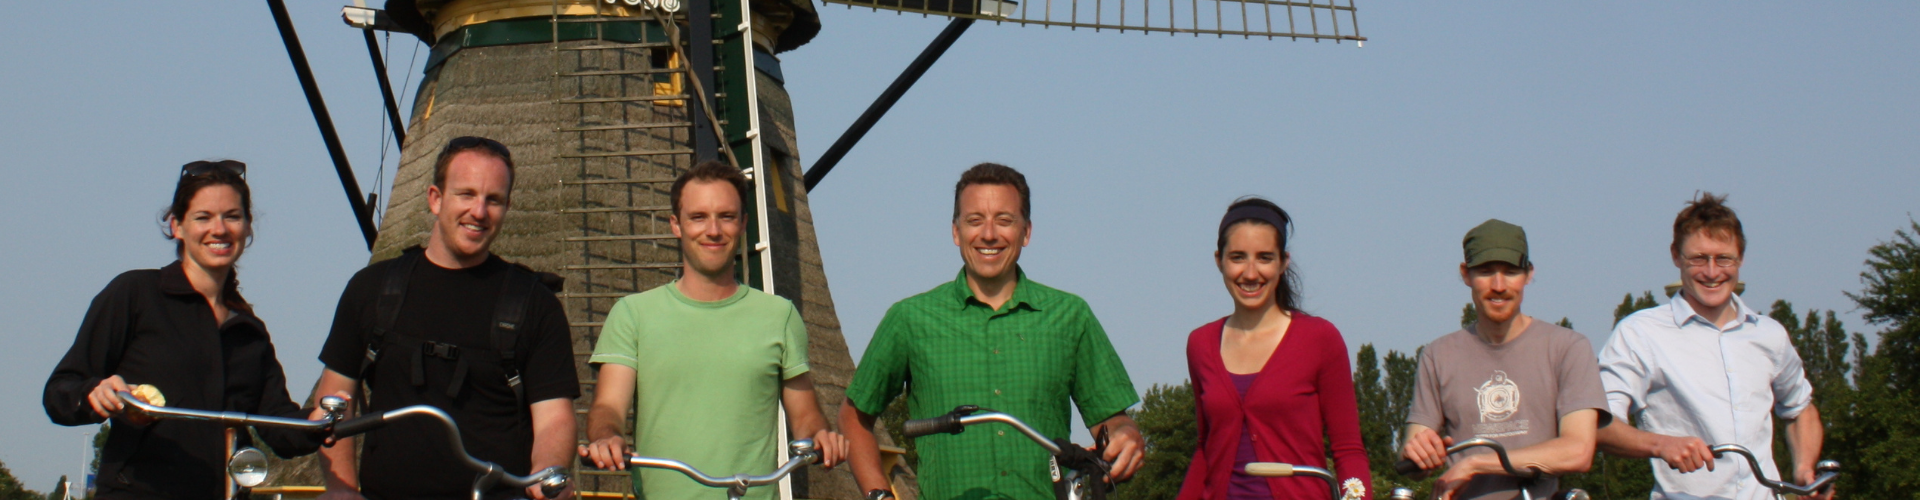 civil engineering class in front of a windmill in the Netherlands